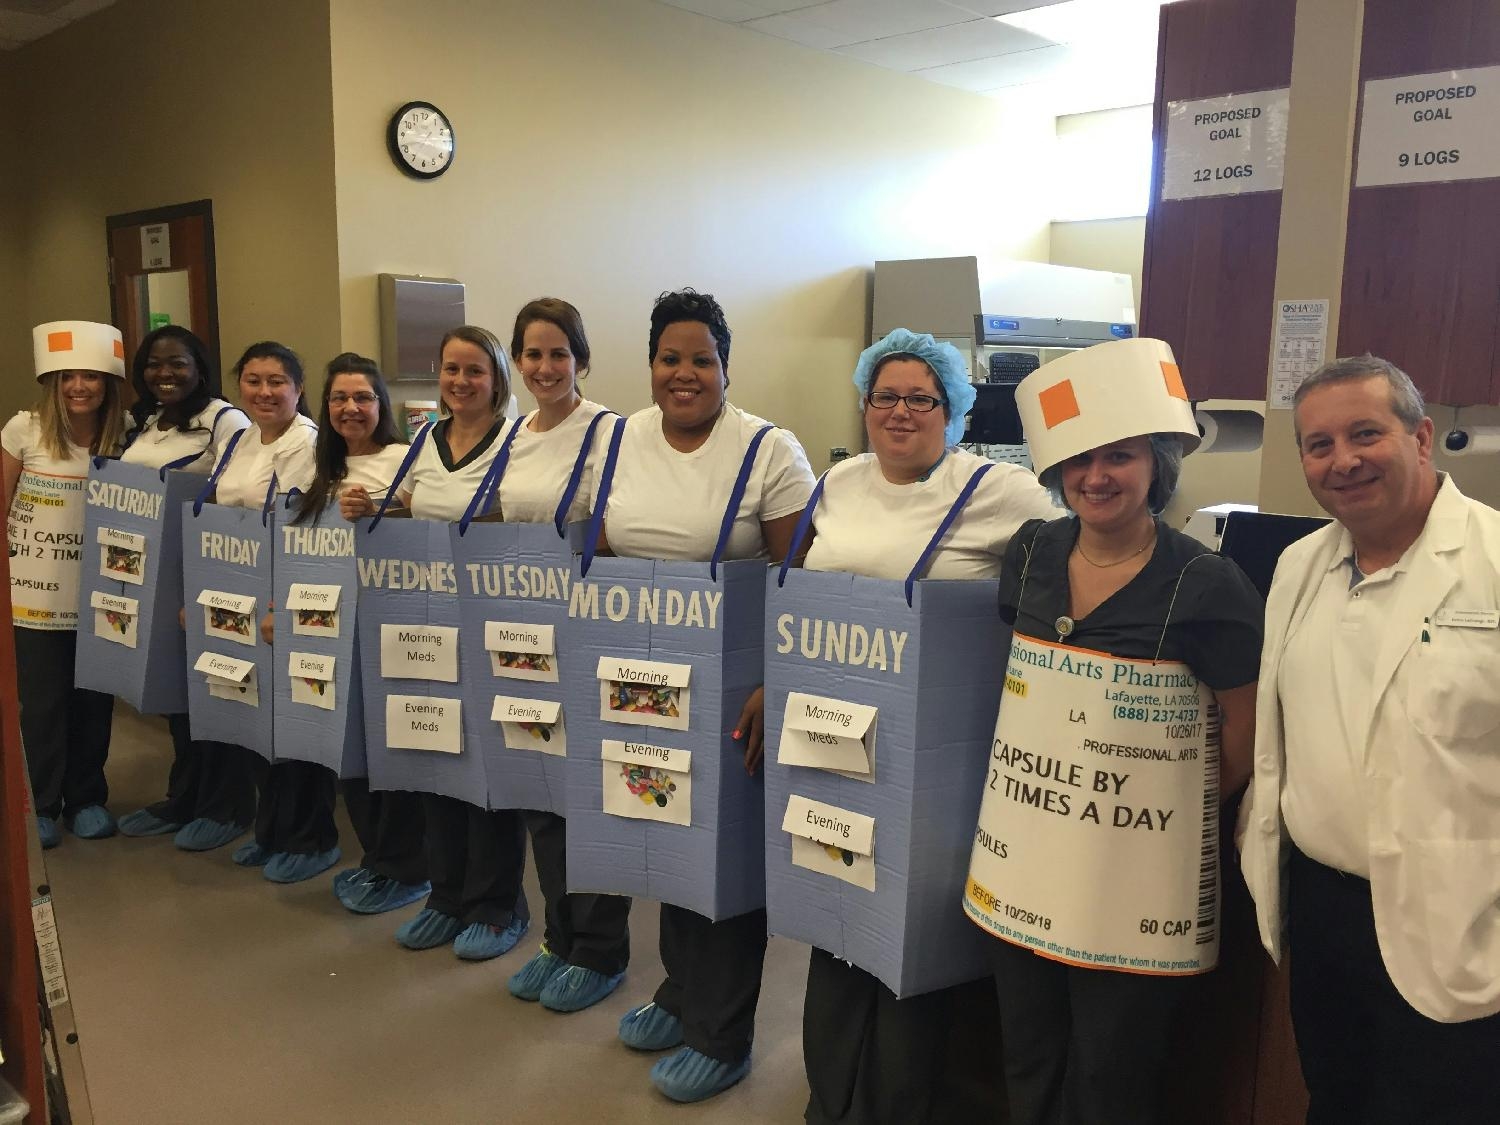 Our Compounding Lab employees dressed up as a Weekly Pill Box for Halloween!  